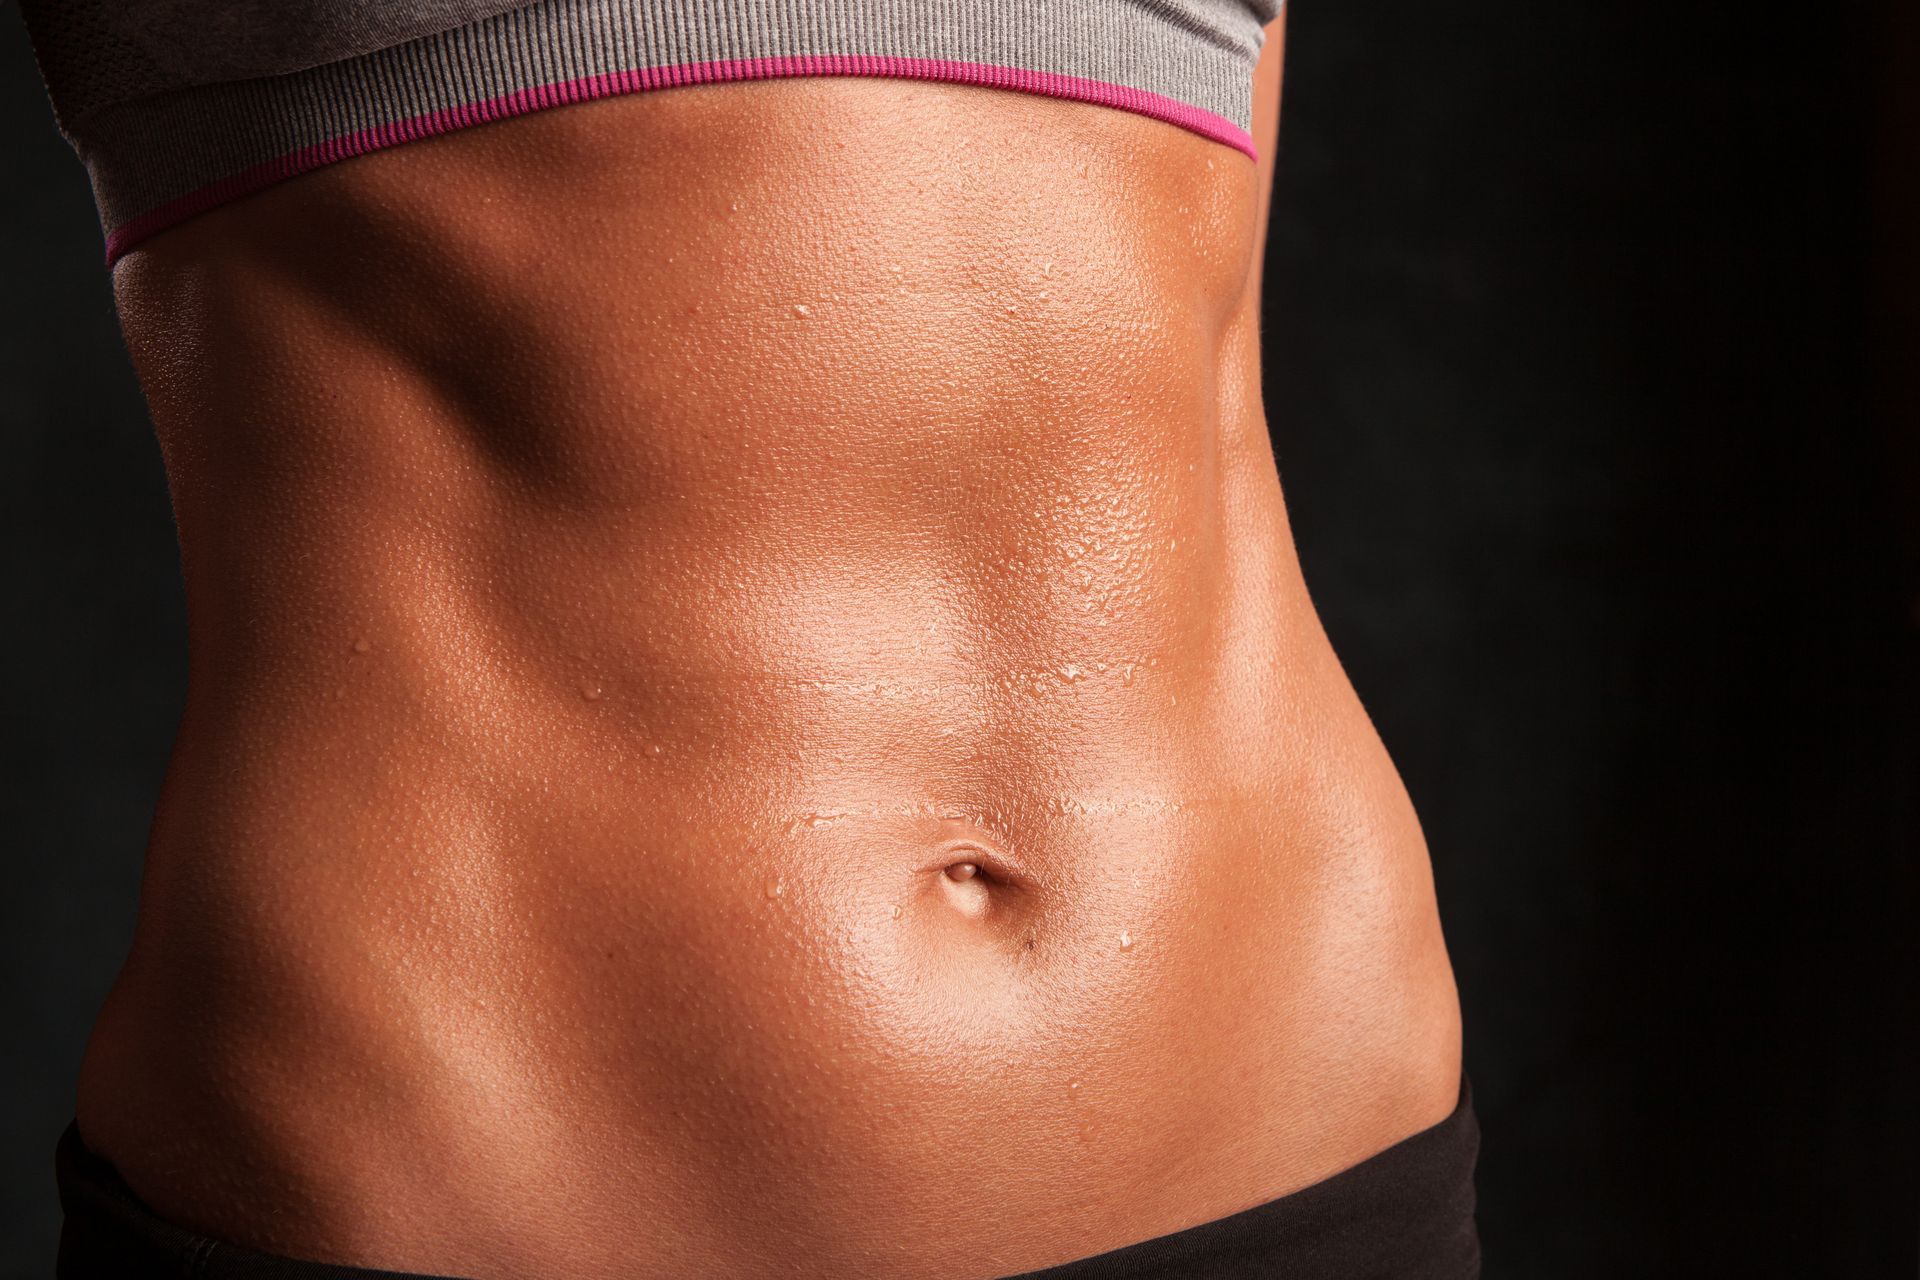 A fit woman with abs